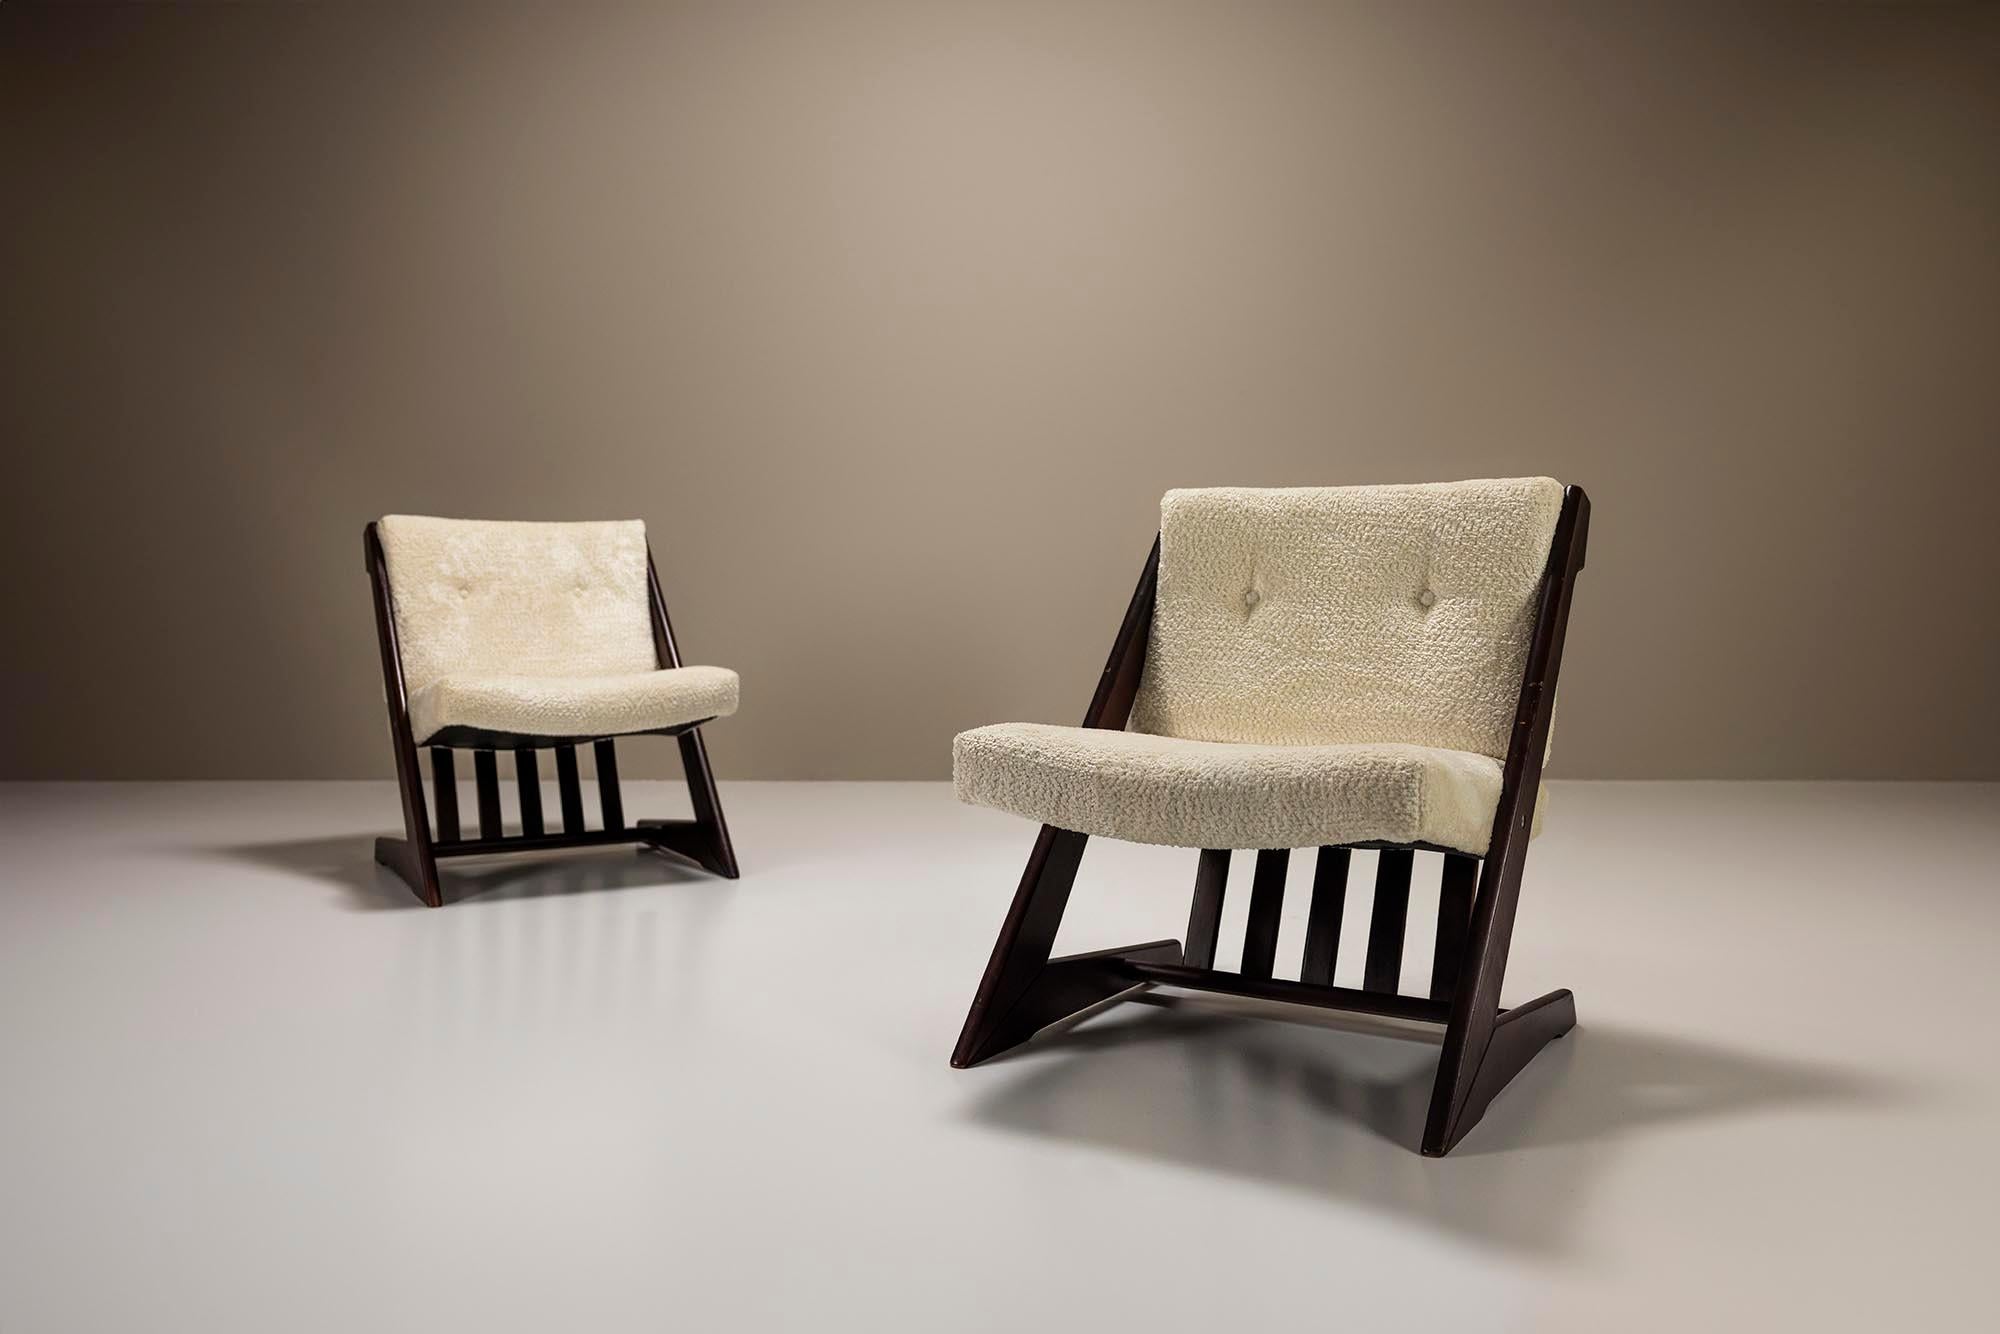 A wonderful set to look at hailing from the groovy seventies period. This concerns two chairs, most likely made in the Netherlands. Sharp shapes and the architectural appearance together make an attractive combination.It’s the frame that immediately